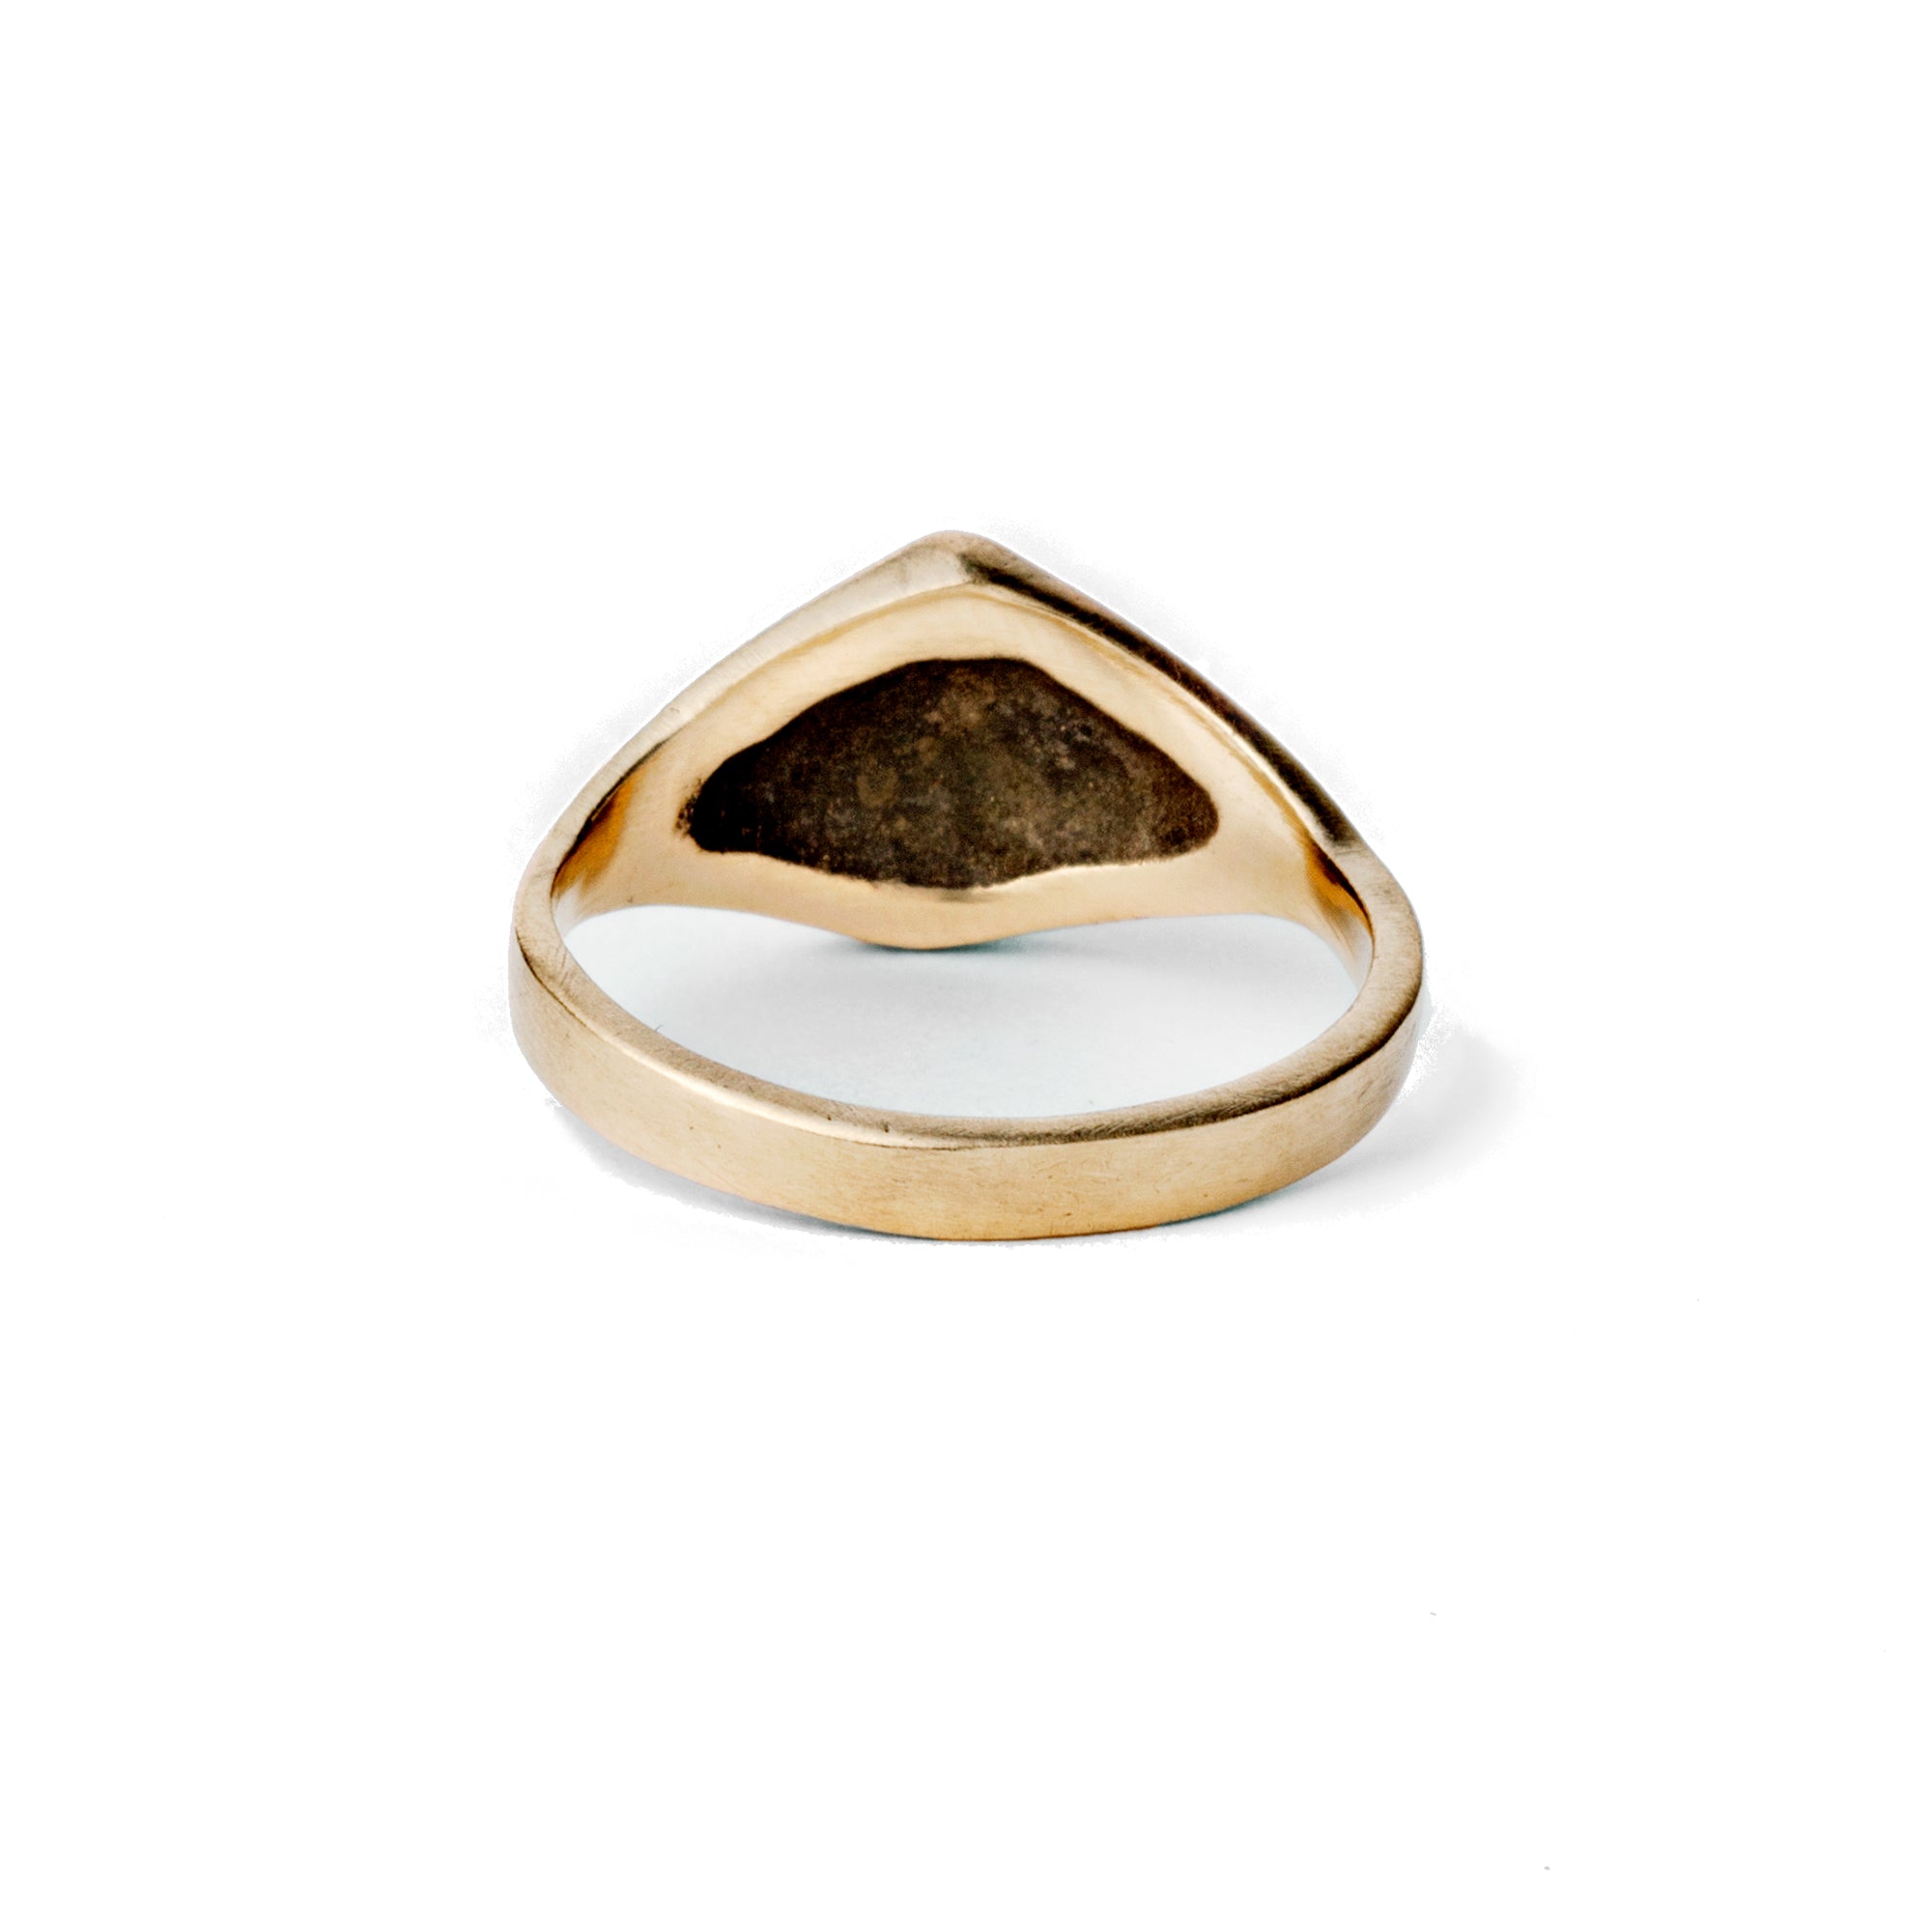 The Graphite Ridge Ring is a 14k gold sleek signet ring with a flat brushed finish and ridge running down the center.